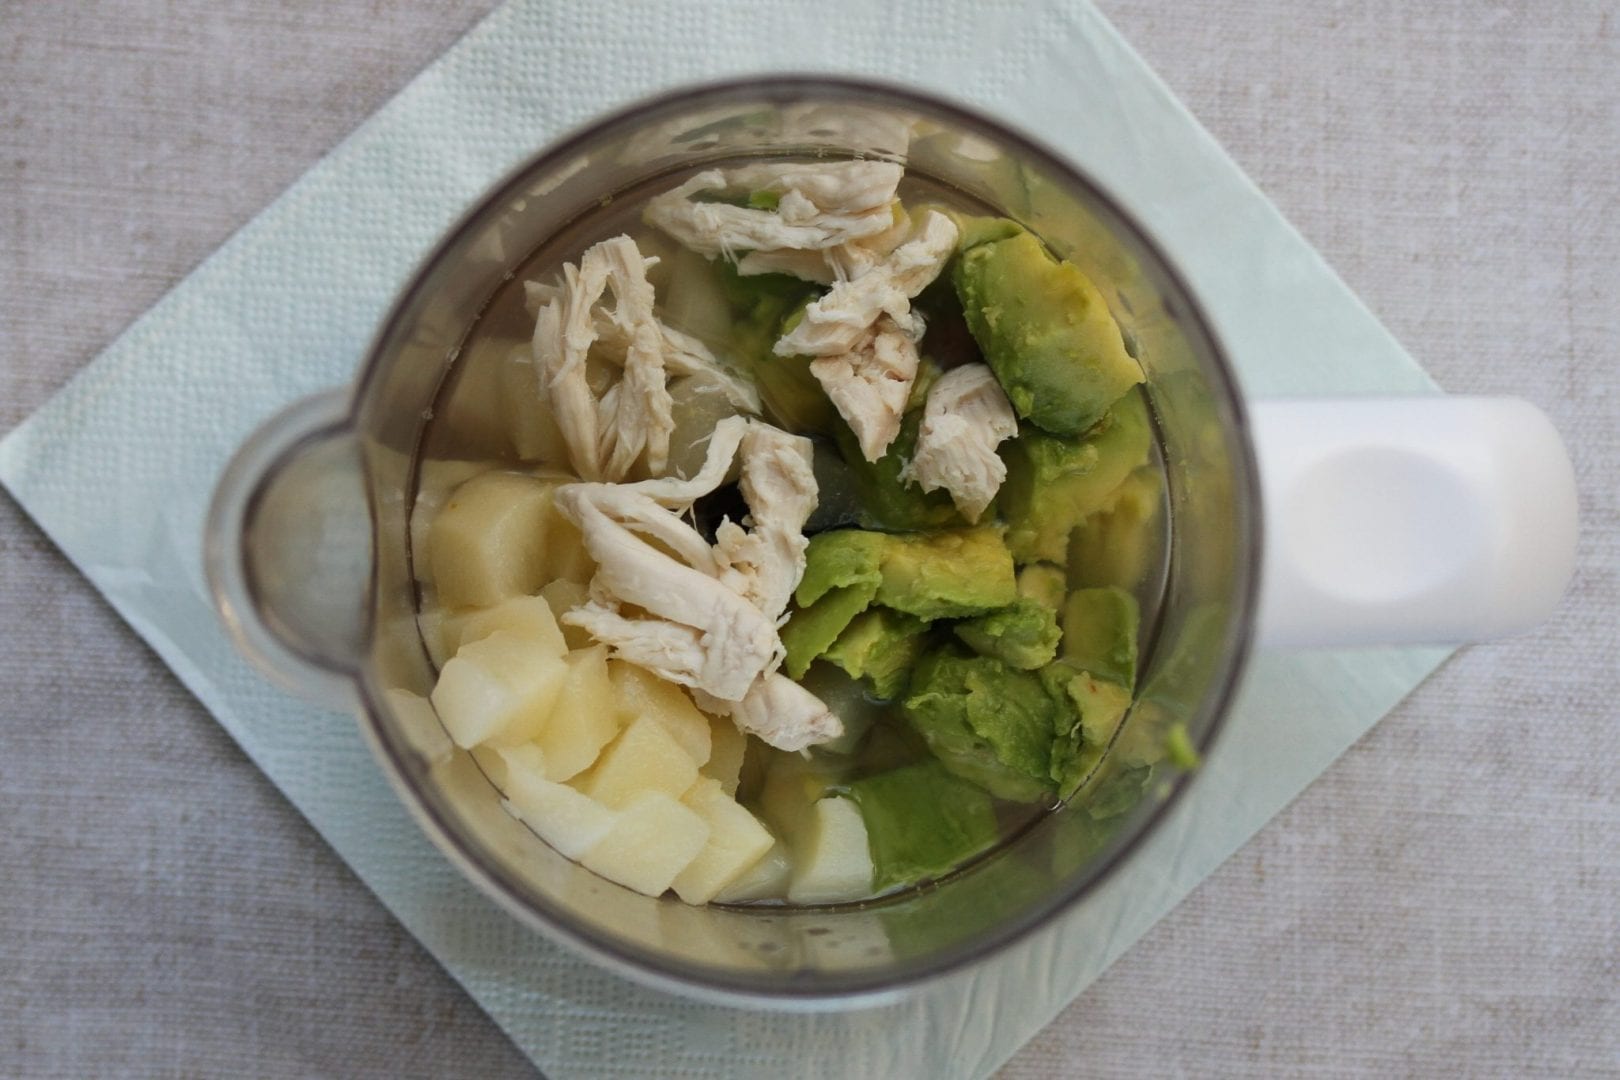 pear avocado and chicken puree - baby first foods, baby purees, weaning recipes